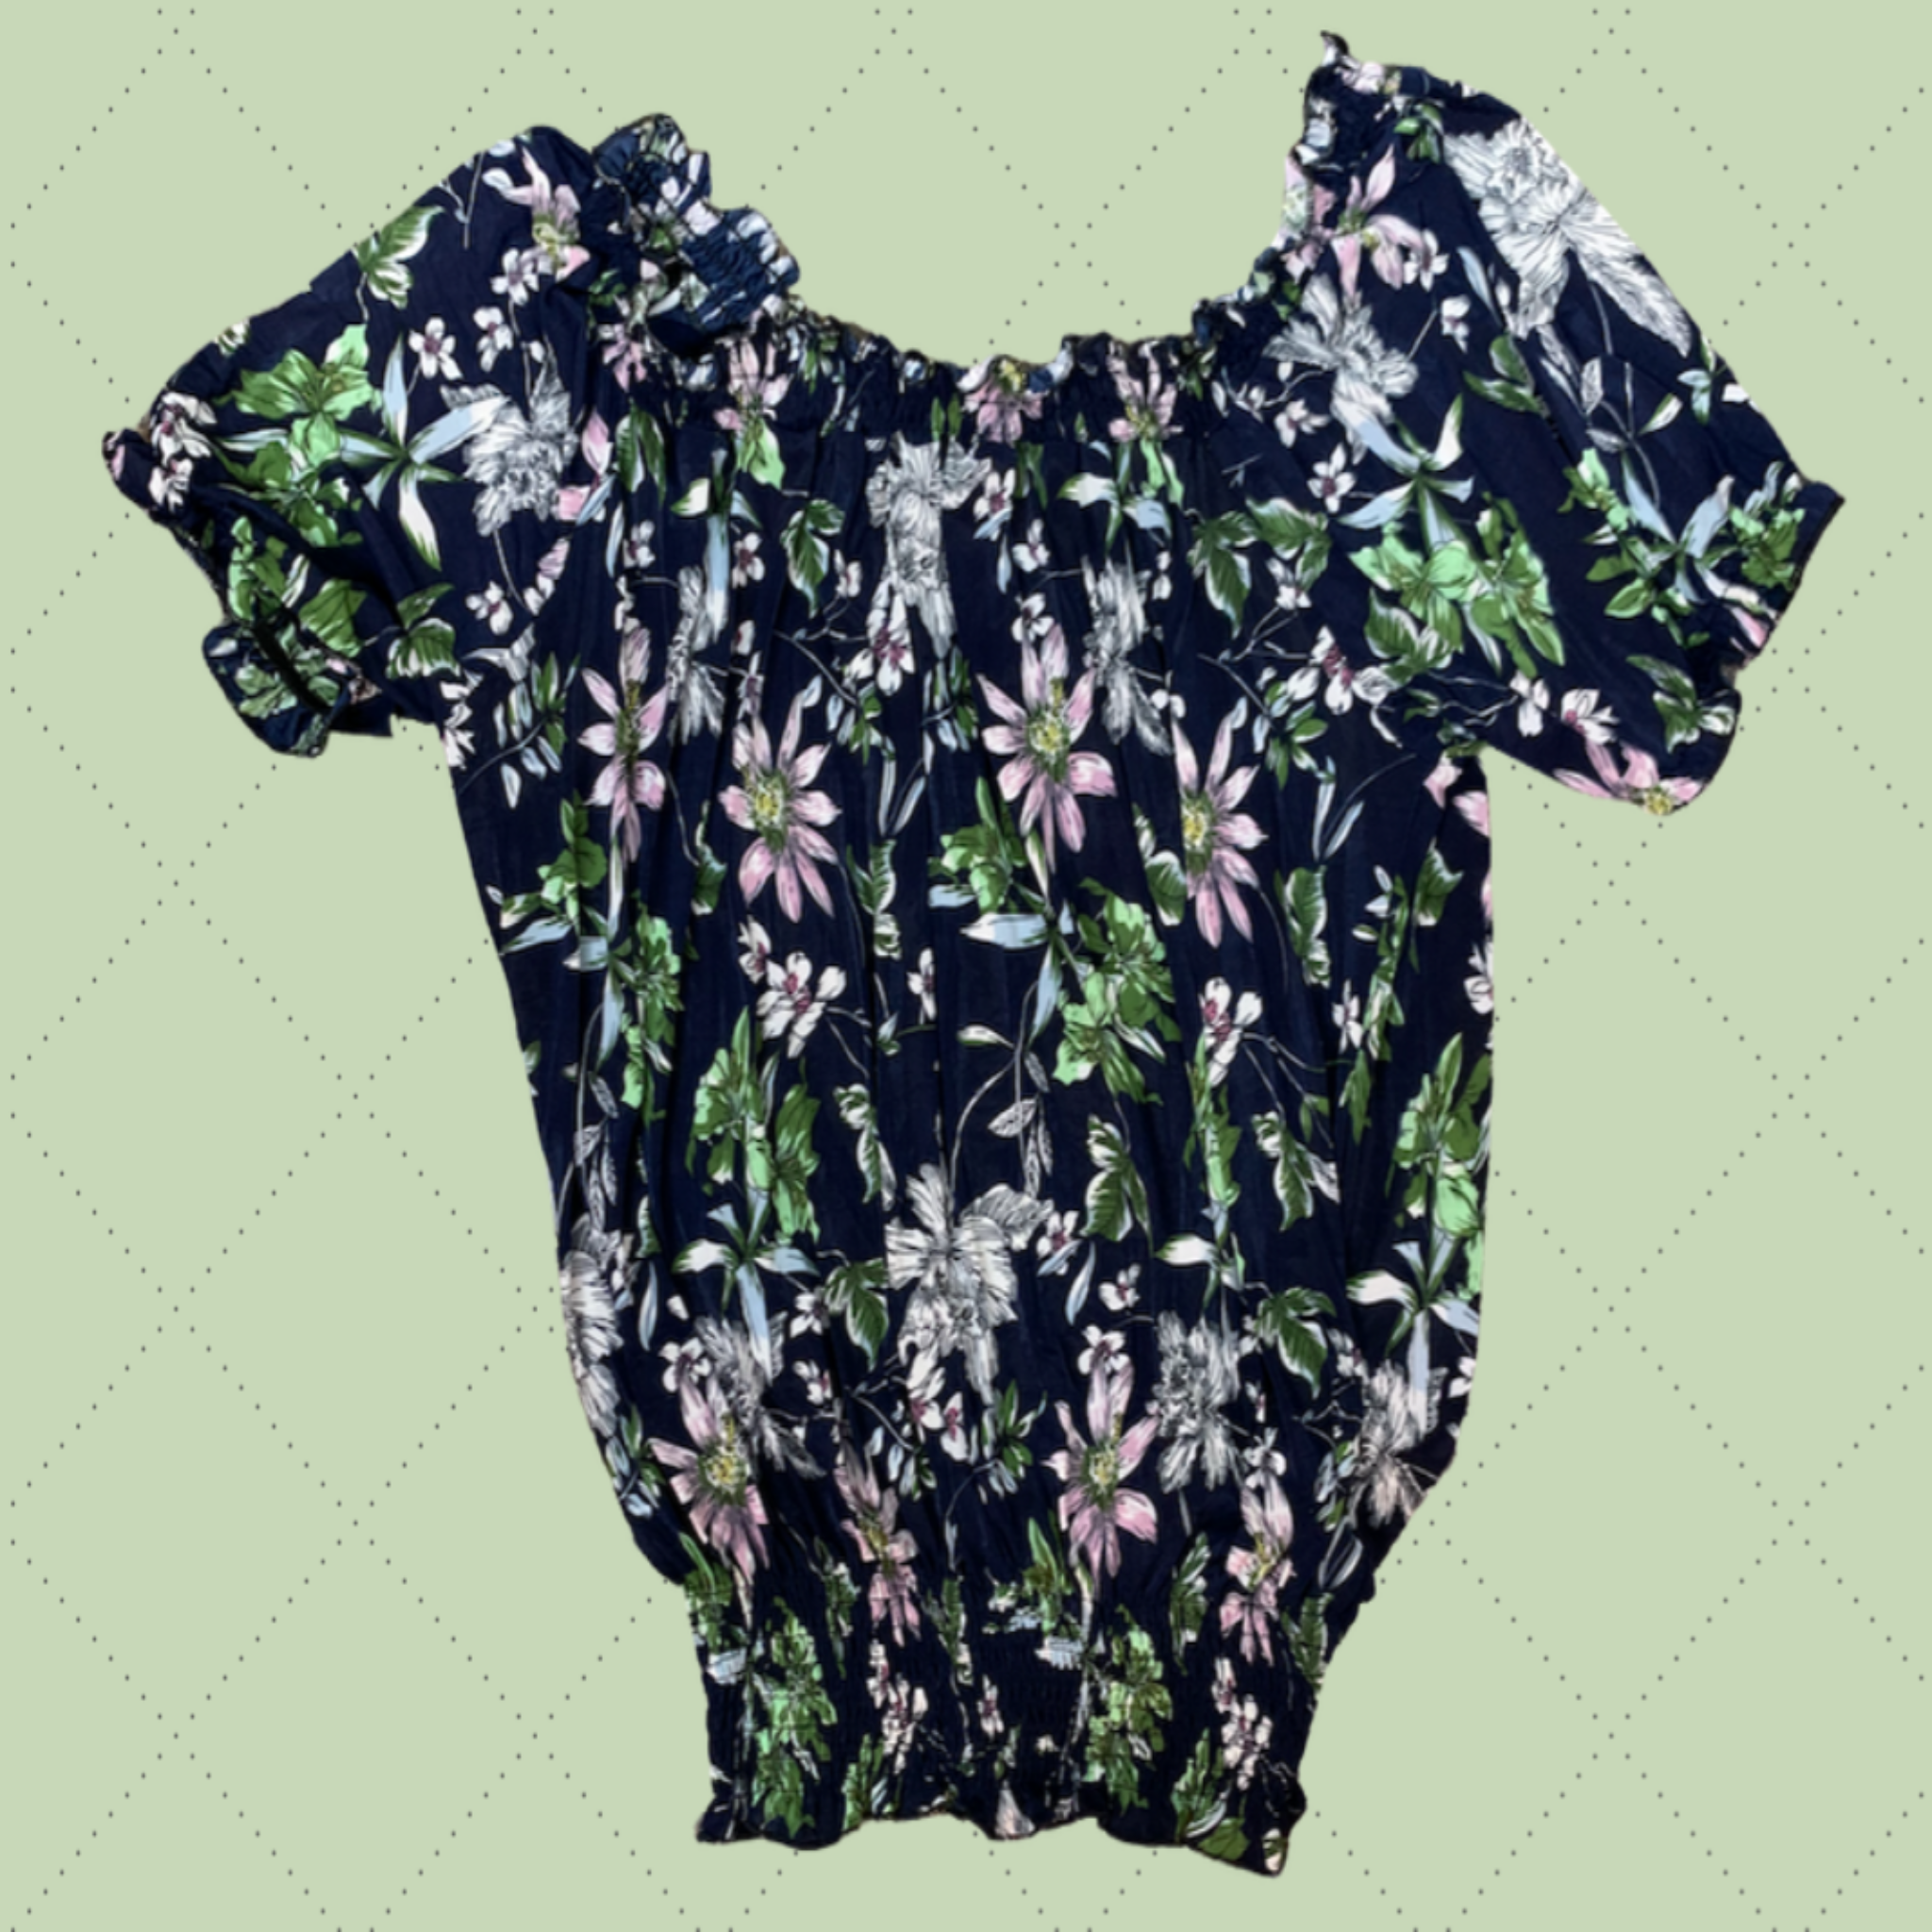 Floral Gathered Top